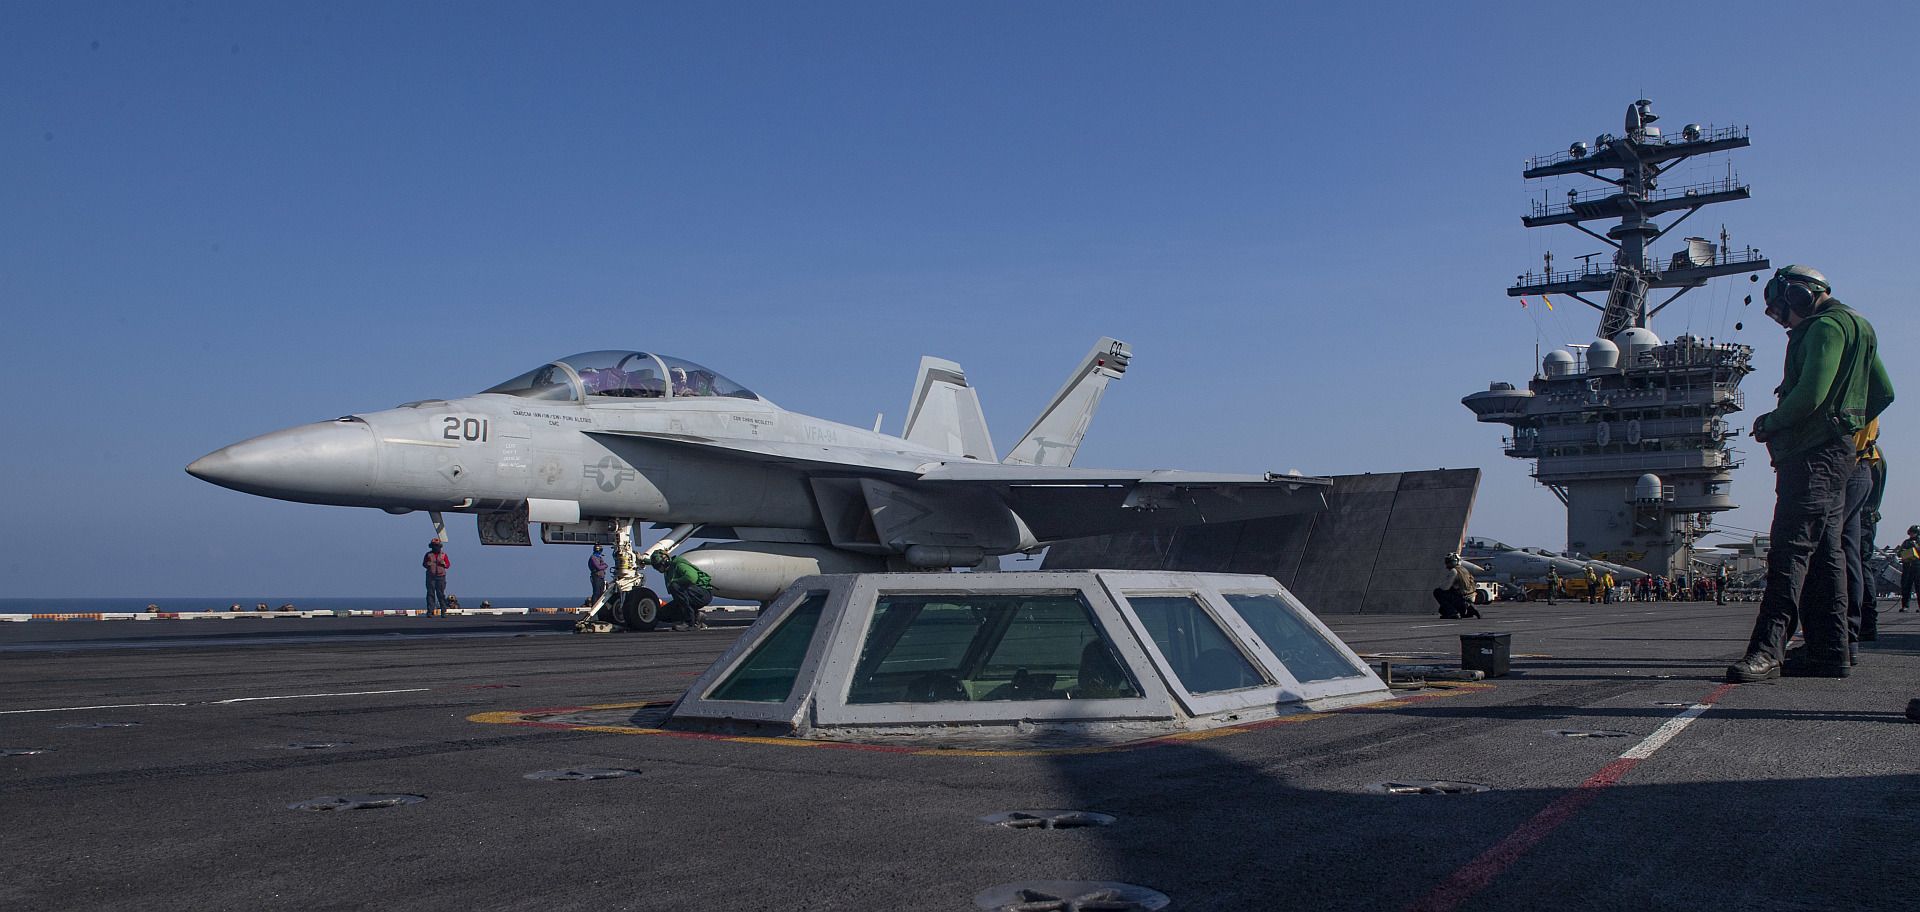 FA 18F Super Hornet From The Mighty Shrikes Of Strike Fighter Squadron VFA 94 Prepares To Launch Off The Flight Deck Of The Aircraft Carrier USS Nimitz